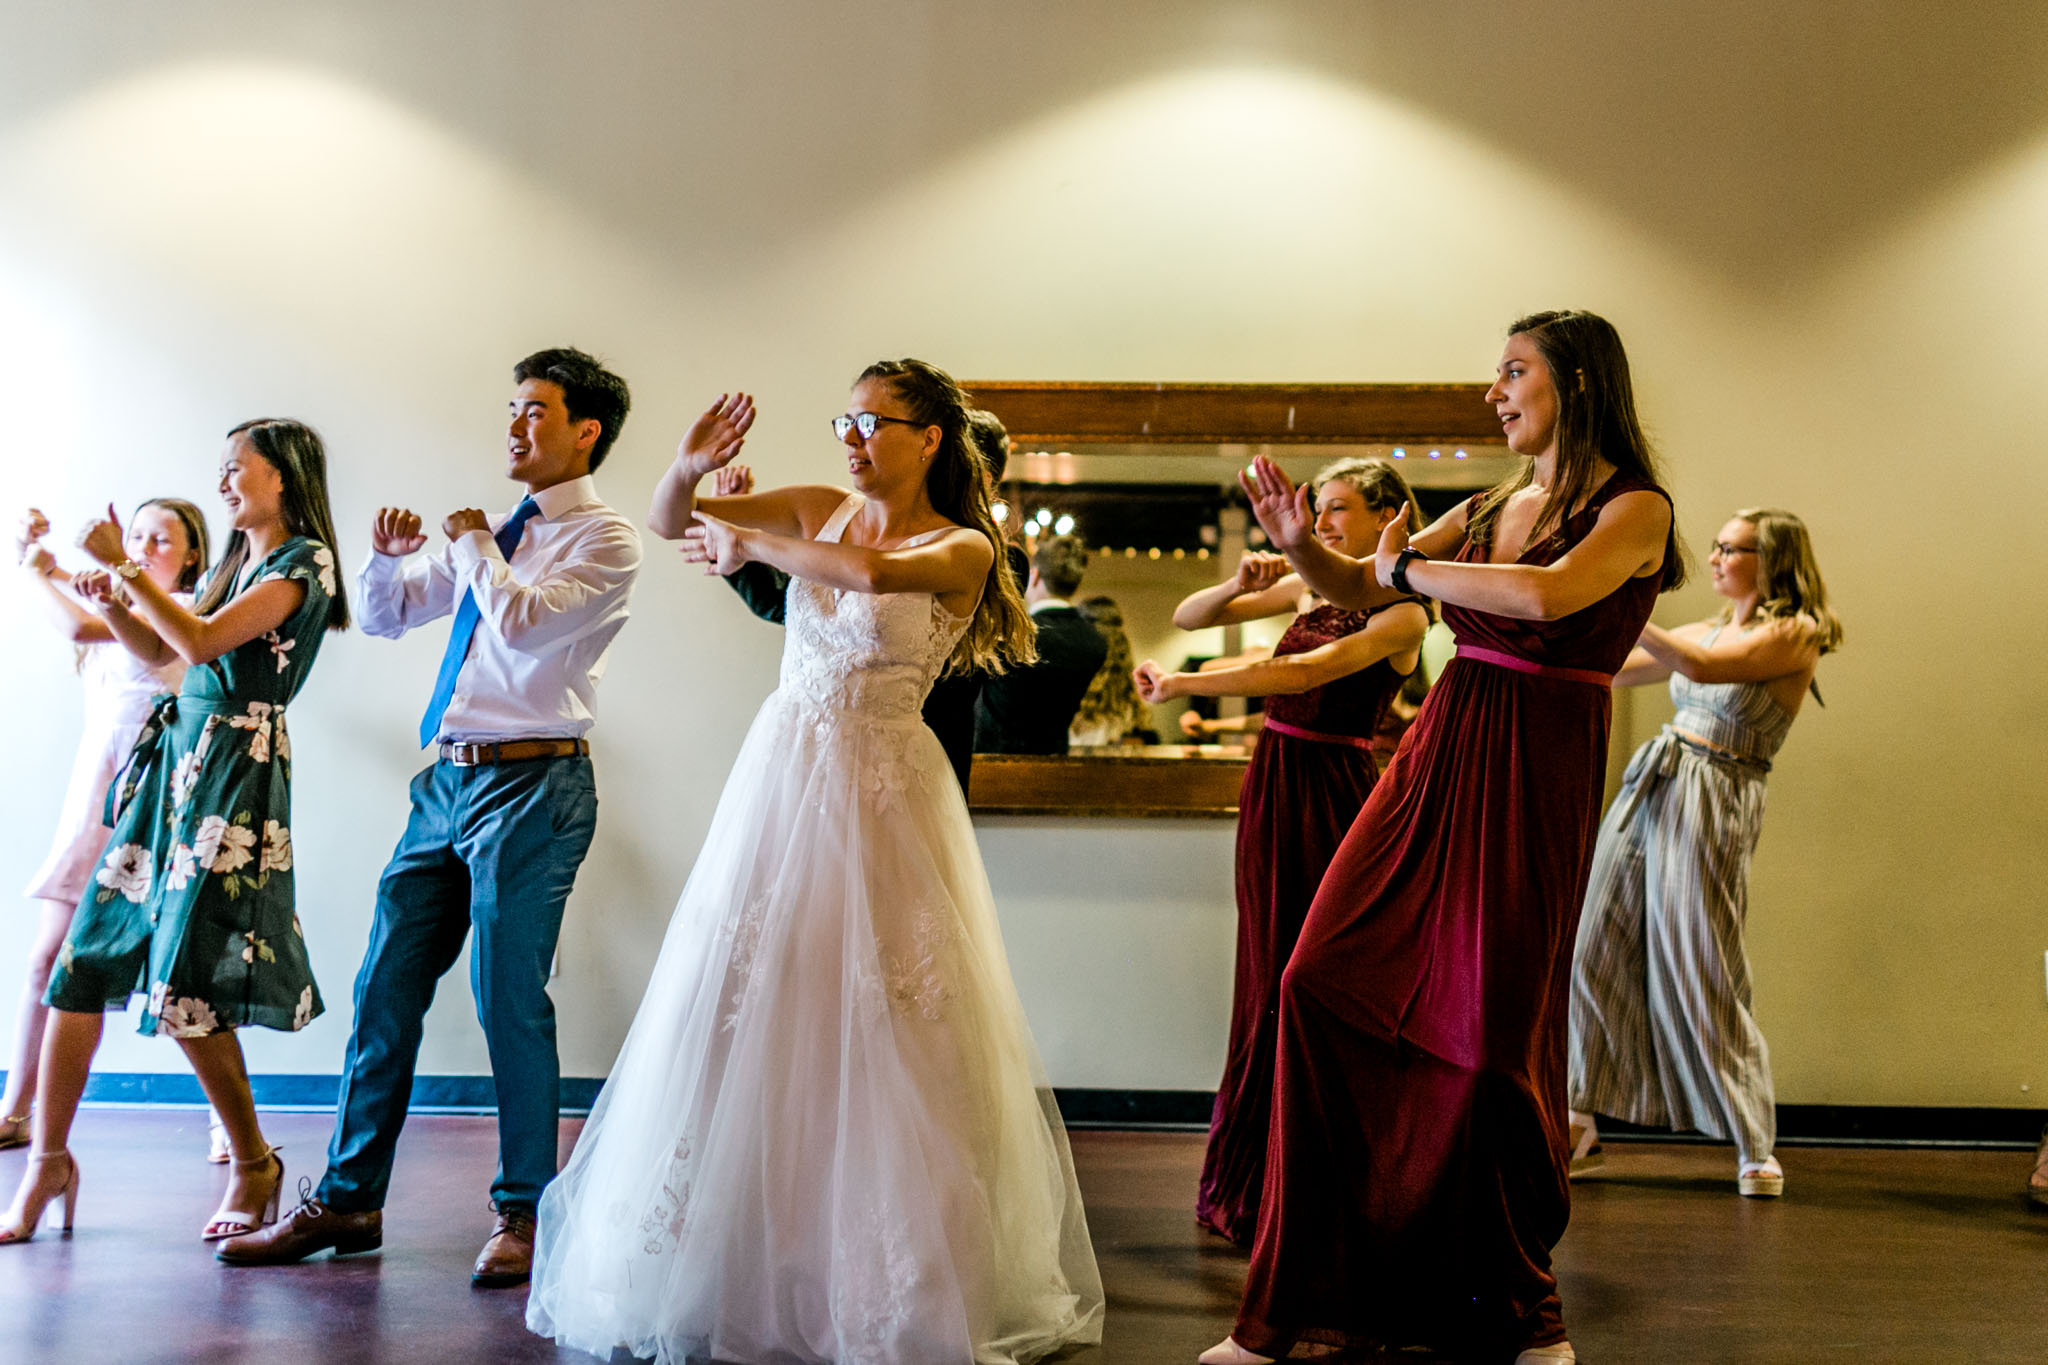 Wedding dancing at Royal Banquet Conference Center | Raleigh Wedding Photographer | By G. Lin Photography